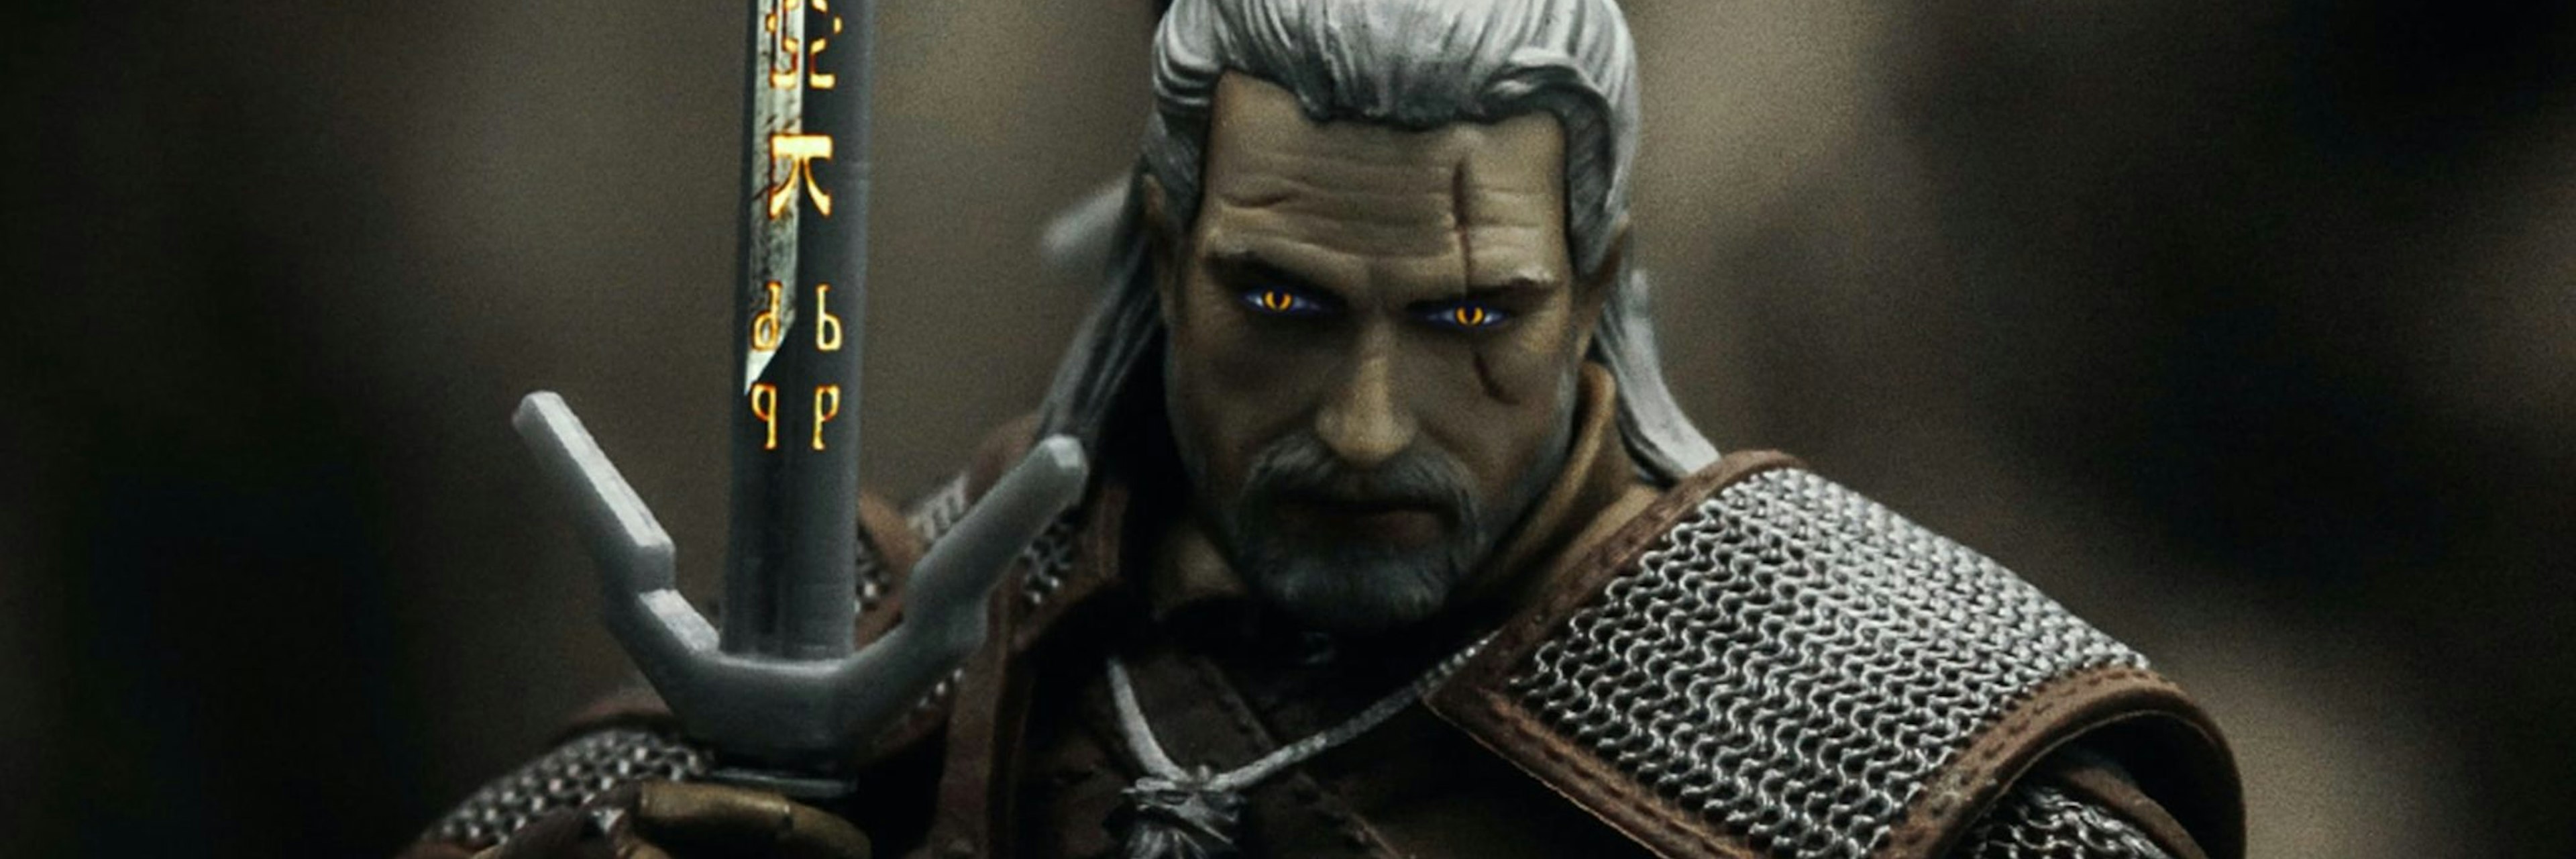 A still from the Witcher video game